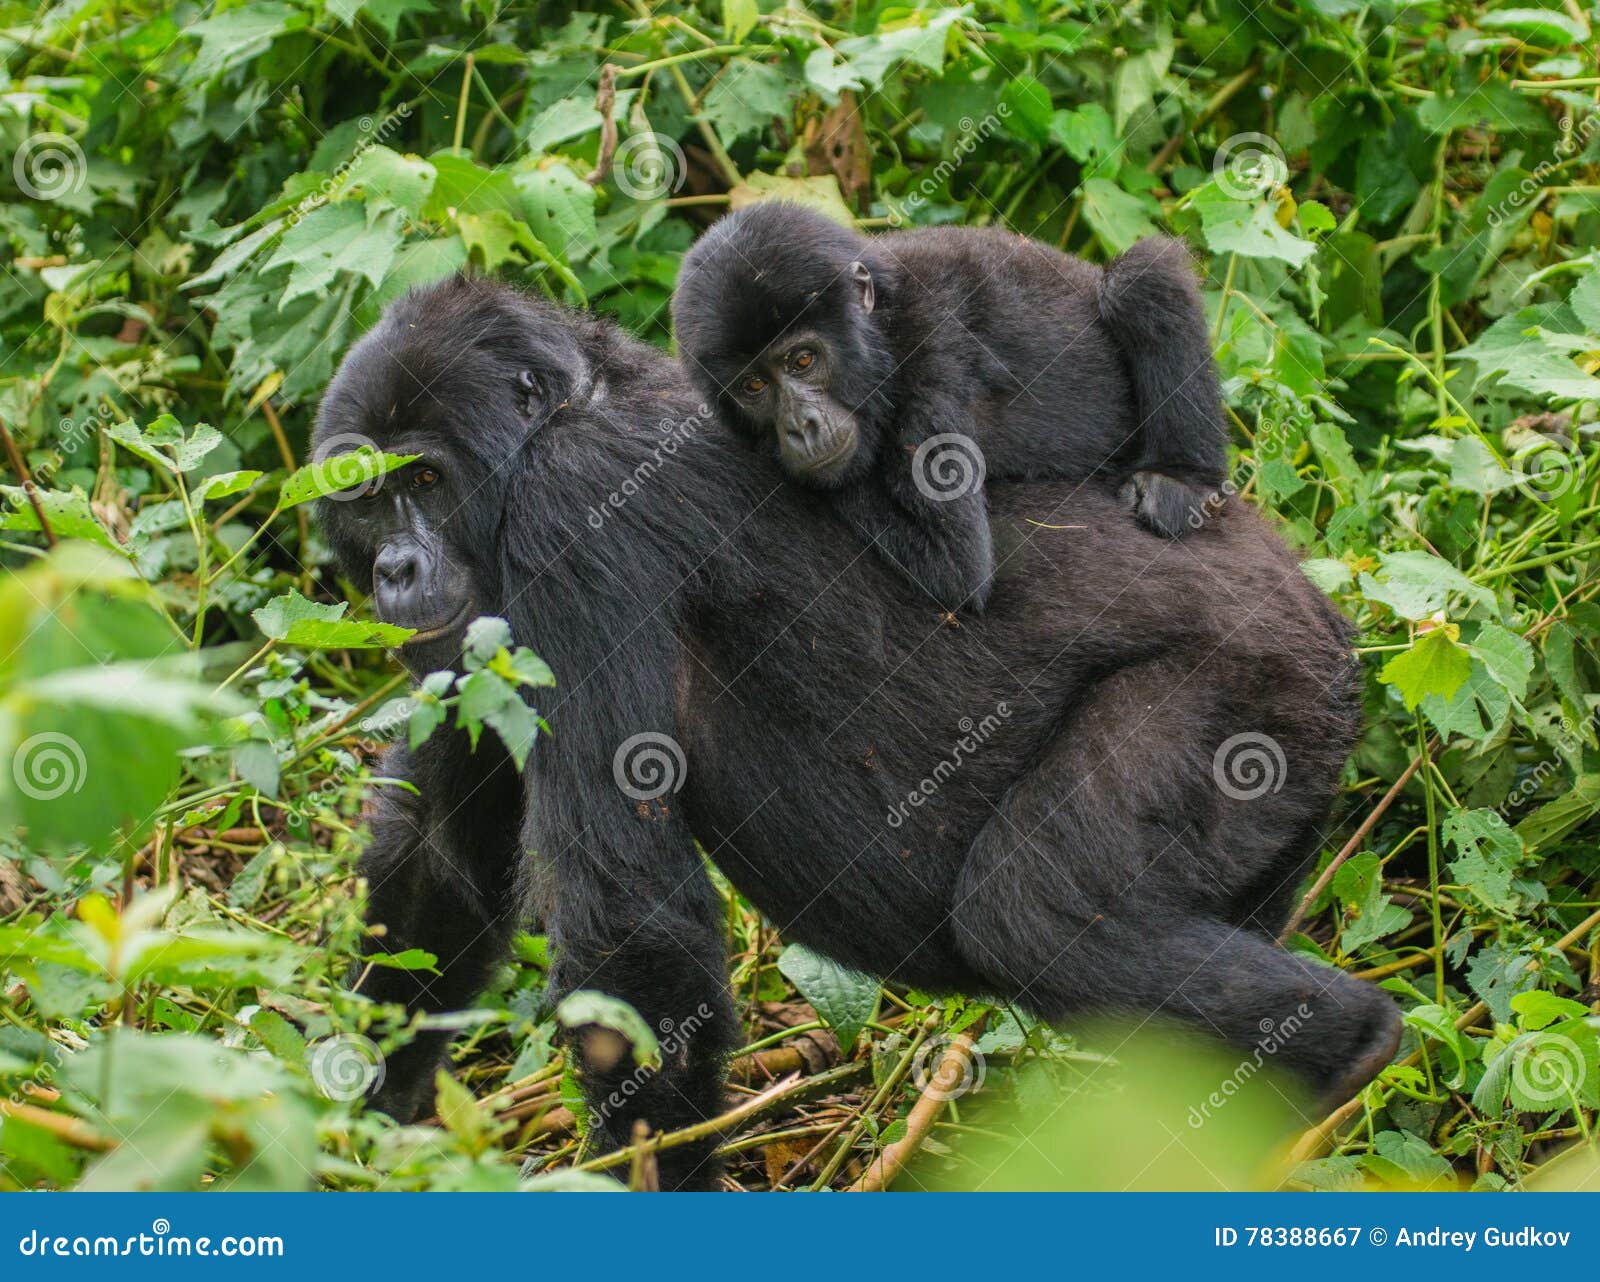 a female mountain gorilla with a baby. uganda. bwindi impenetrable forest national park.